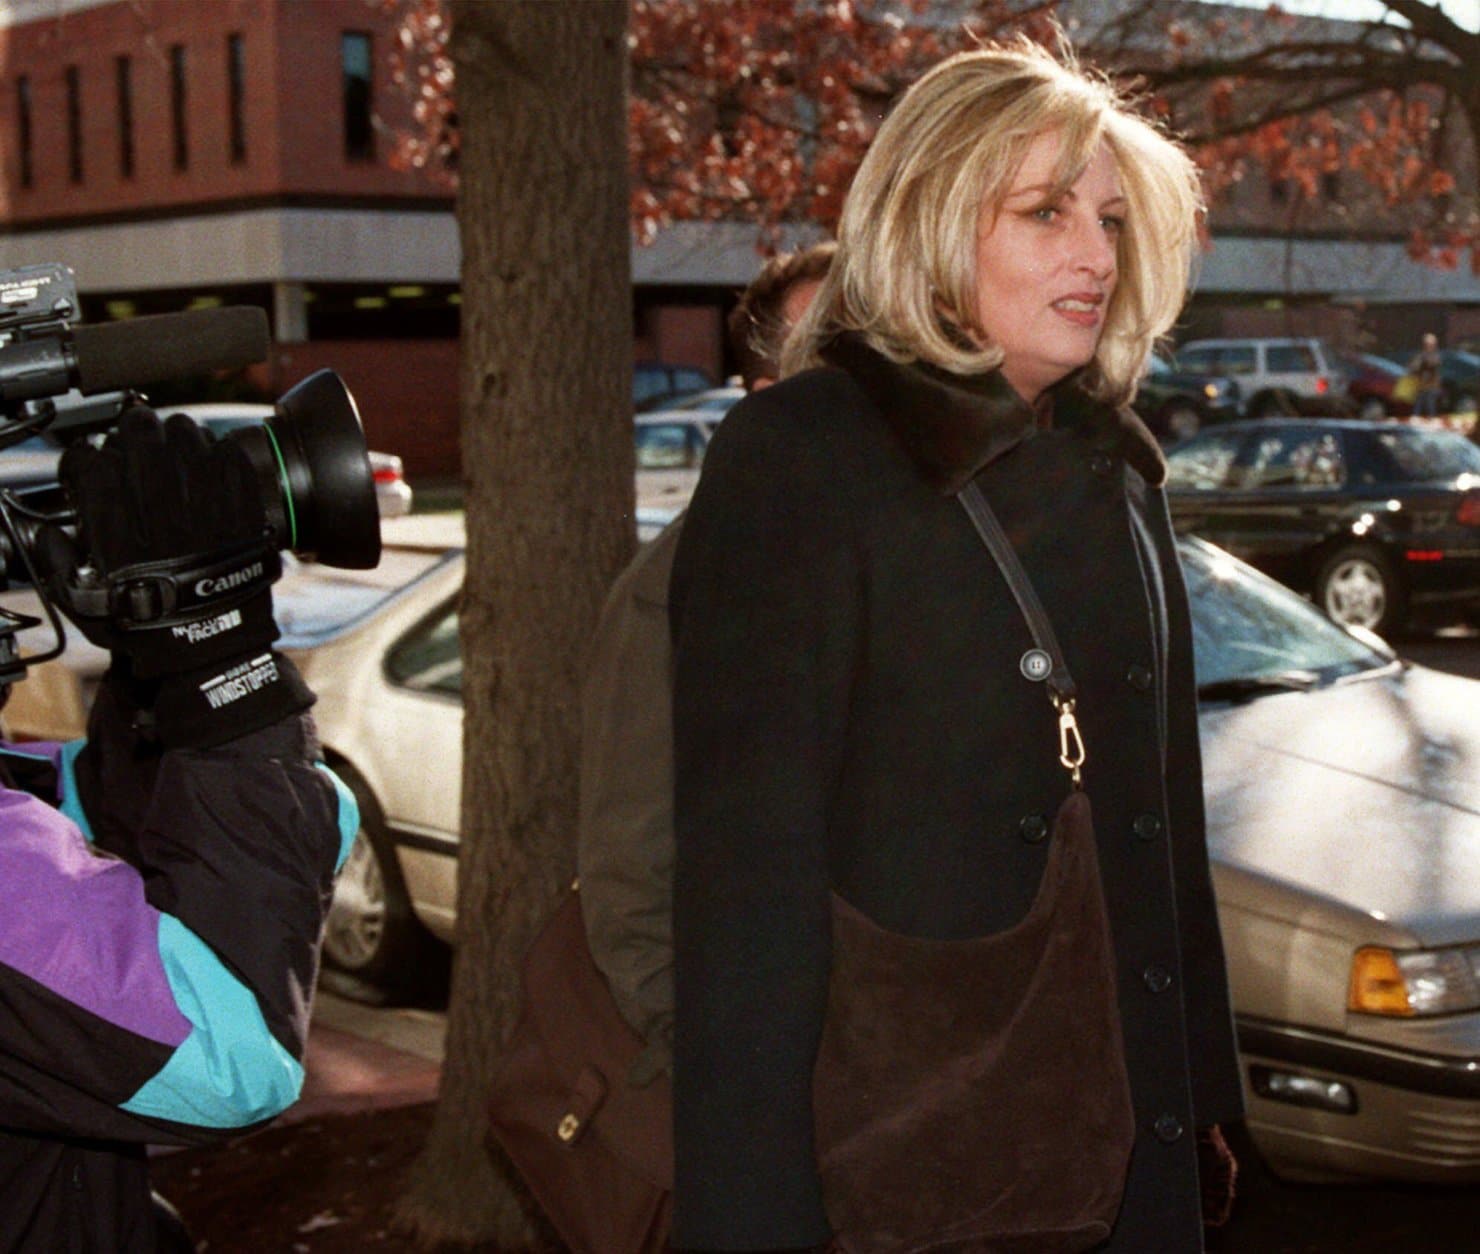 Linda Tripp arrives at the offices of Judicial Watch, a public interest law firm, in Washington Monday, Dec. 14, 1998 to give a deposition in a lawsuit about the FBI files controversy. Tripp, who formerally worked at the White House, and had her FBI security clearence released by the Pentagon to the news media, was to be questioned by Judicial Watch to determine whether the White House was behind the release of the information. (AP Photo/Dennis Cook)